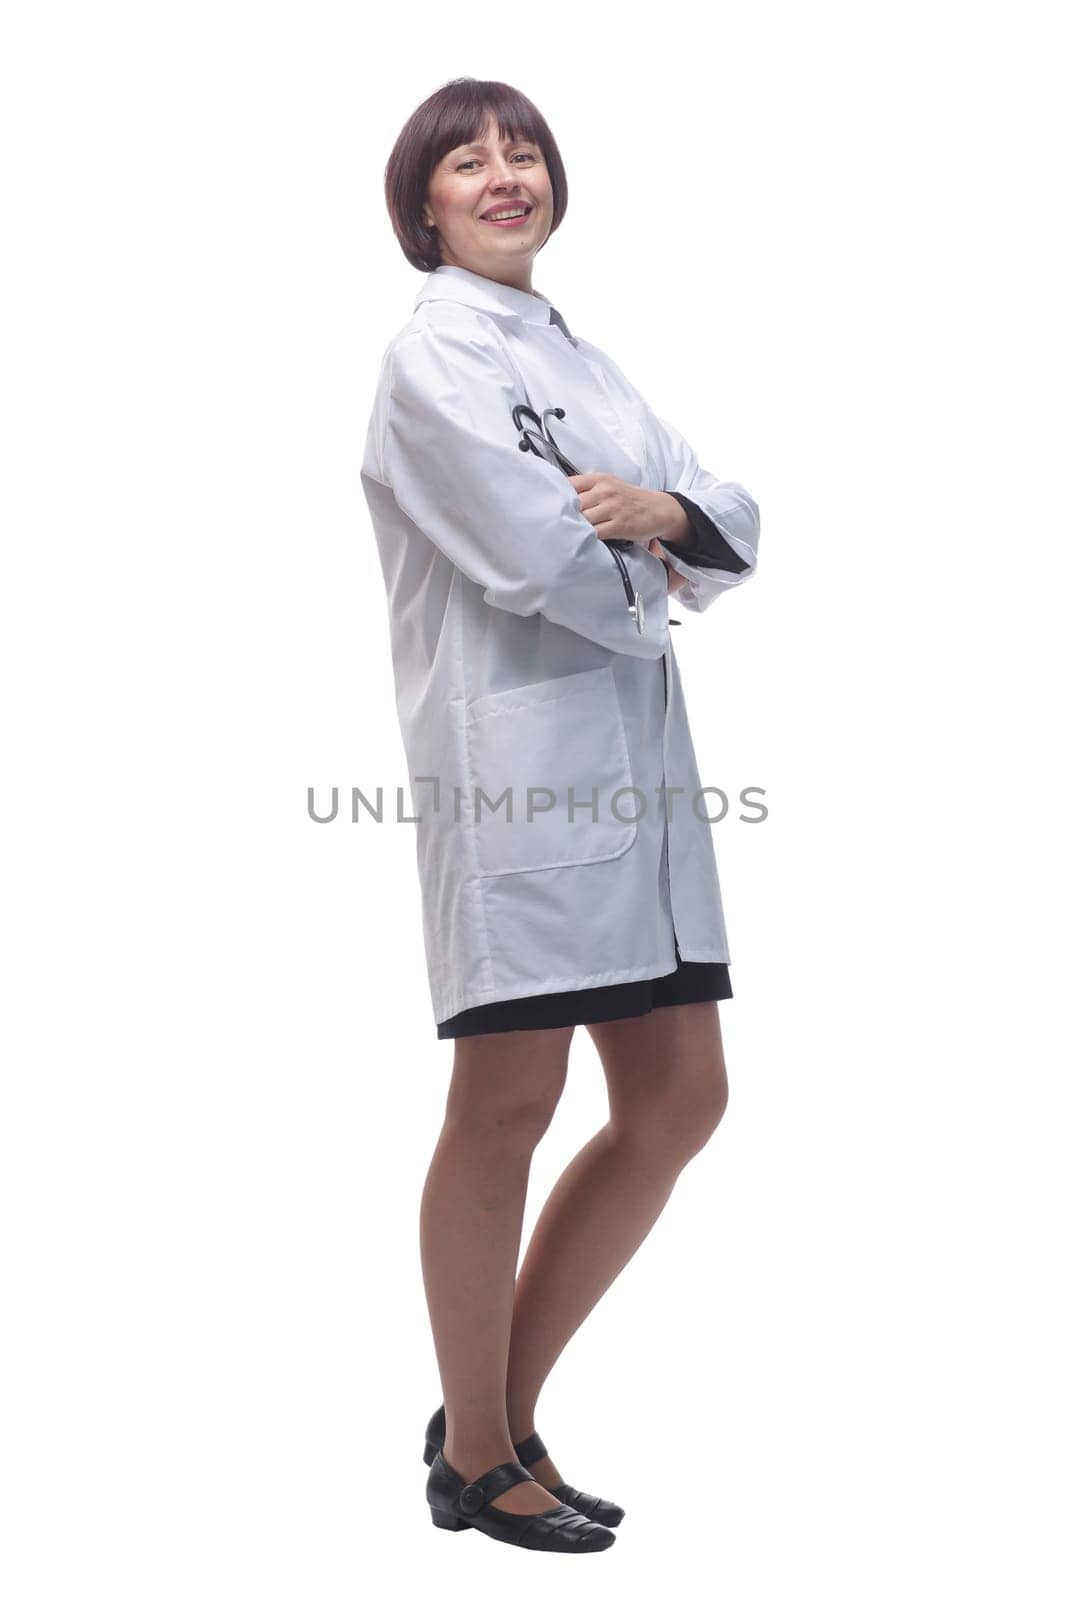 friendly female doctor with a stethoscope in her hands by asdf